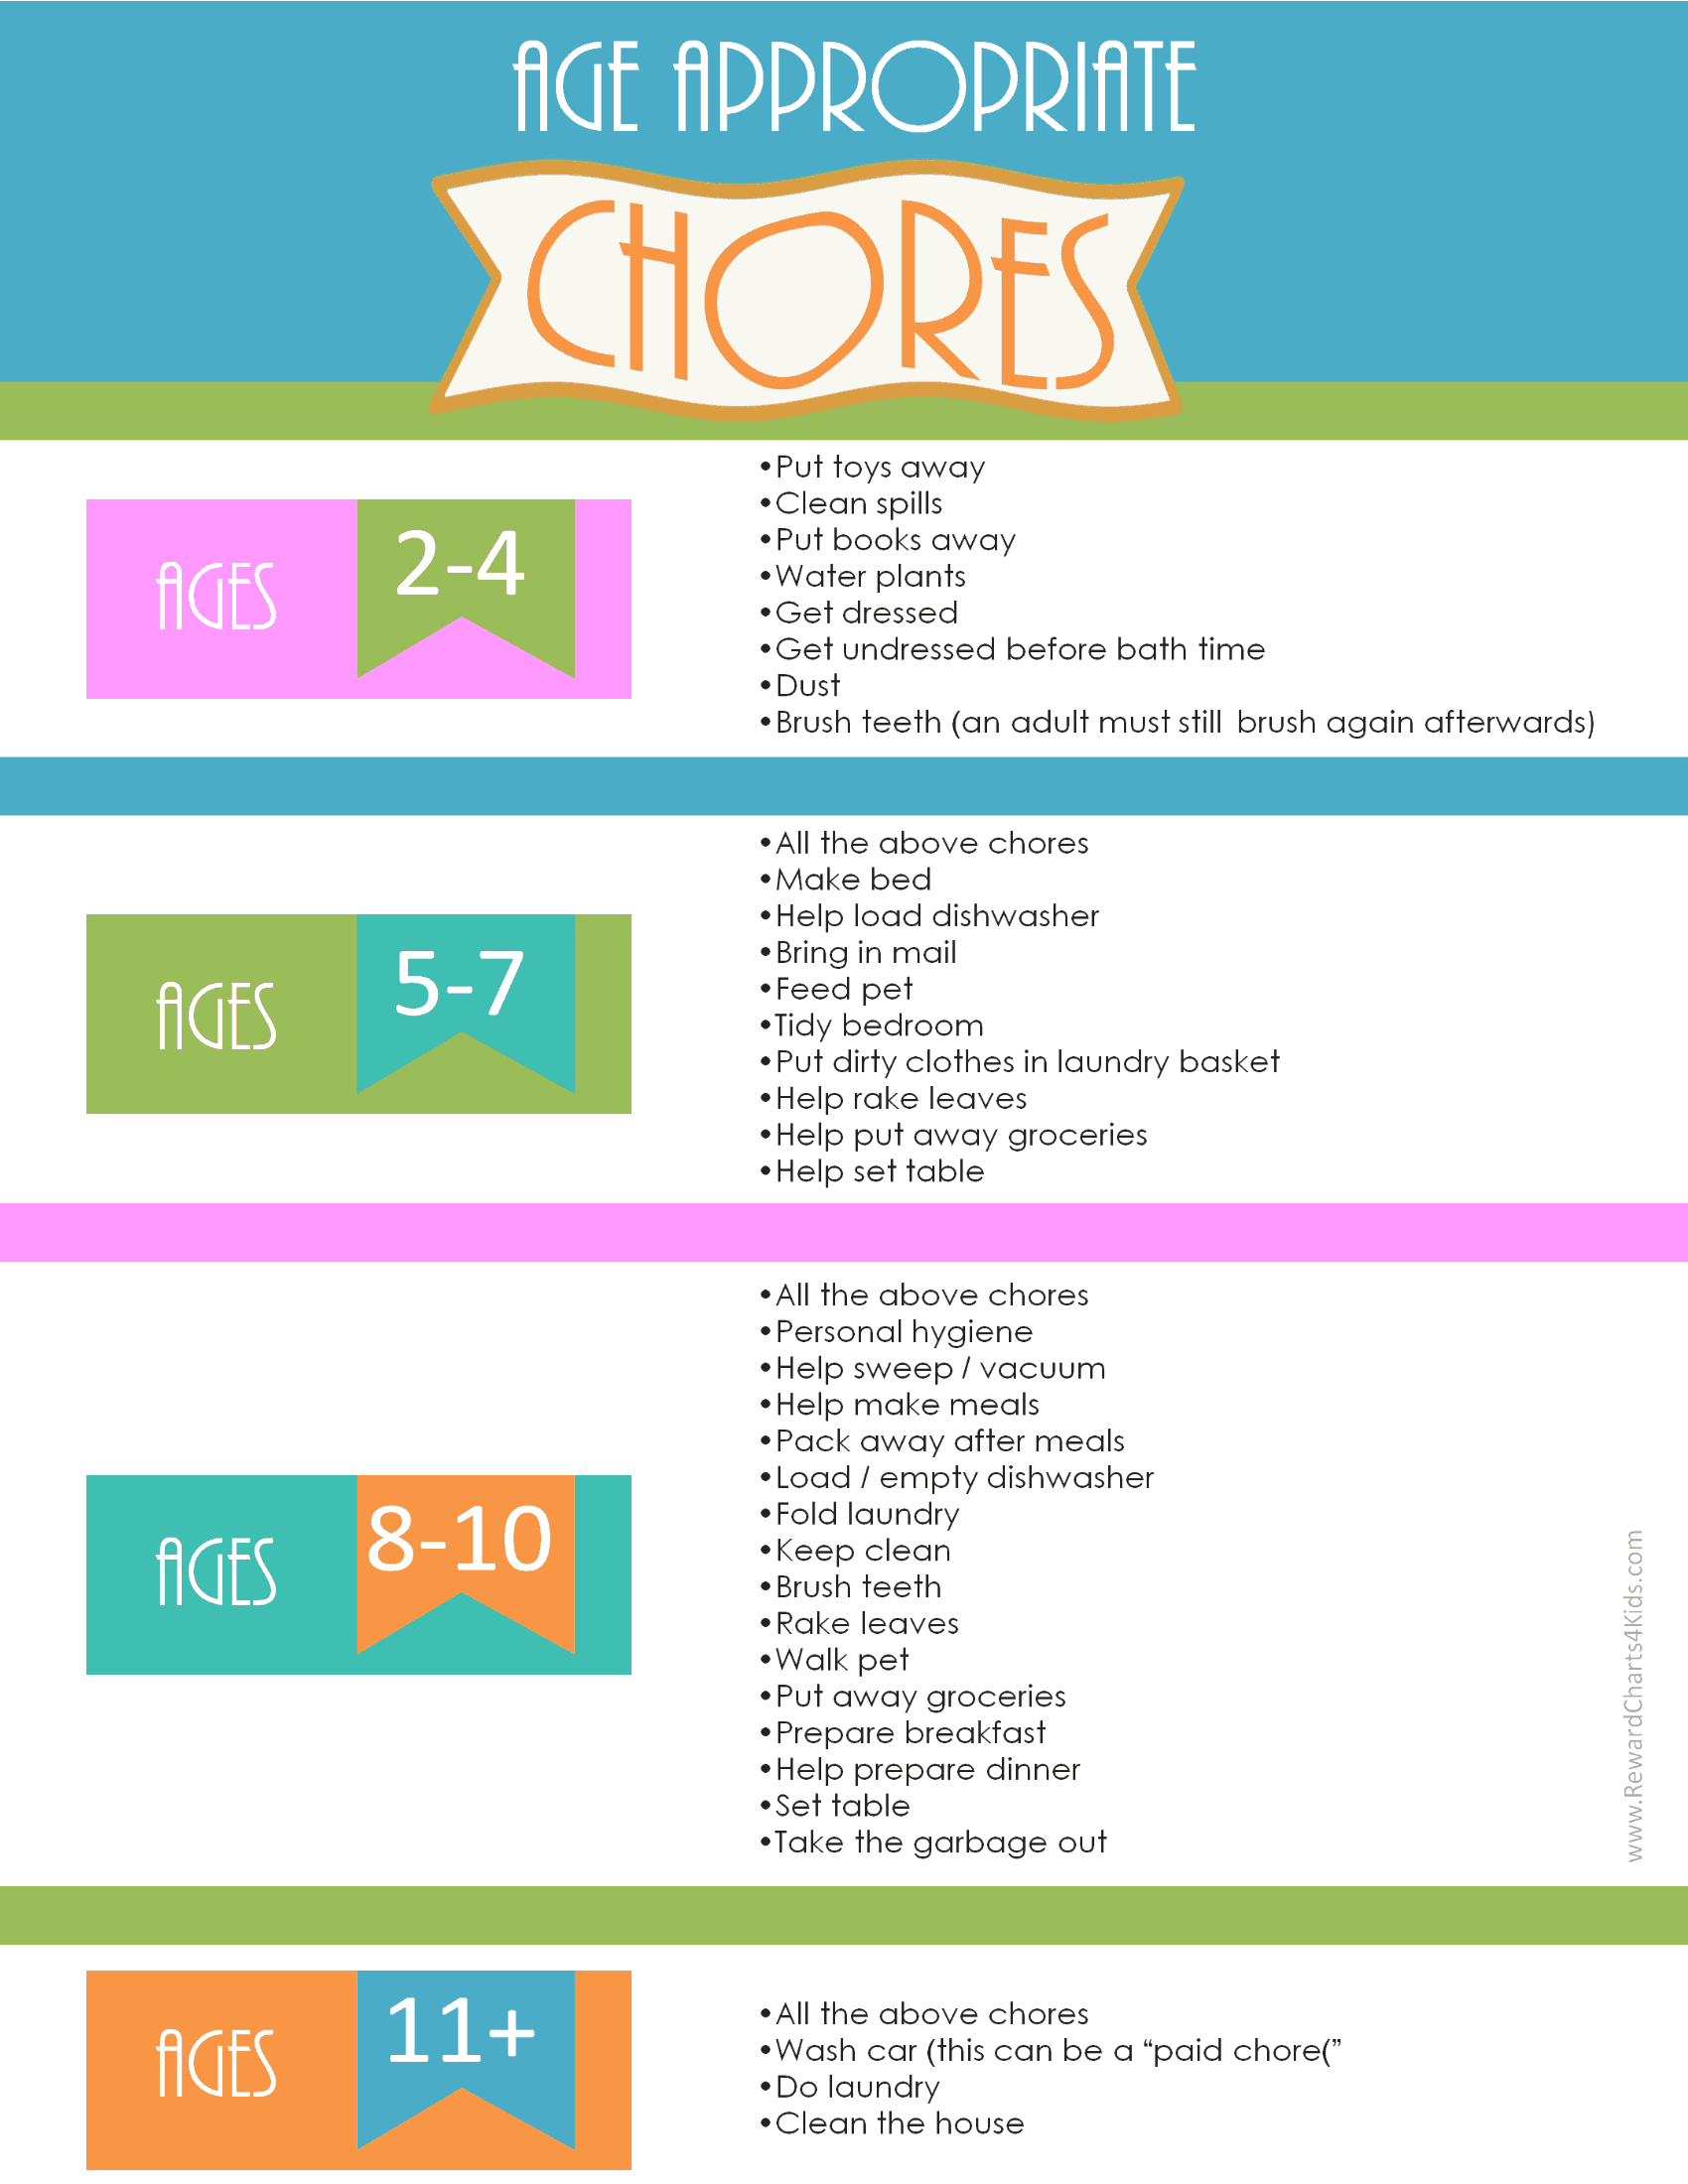 age-appropriate-chores-free-printable-list-of-chores-per-age